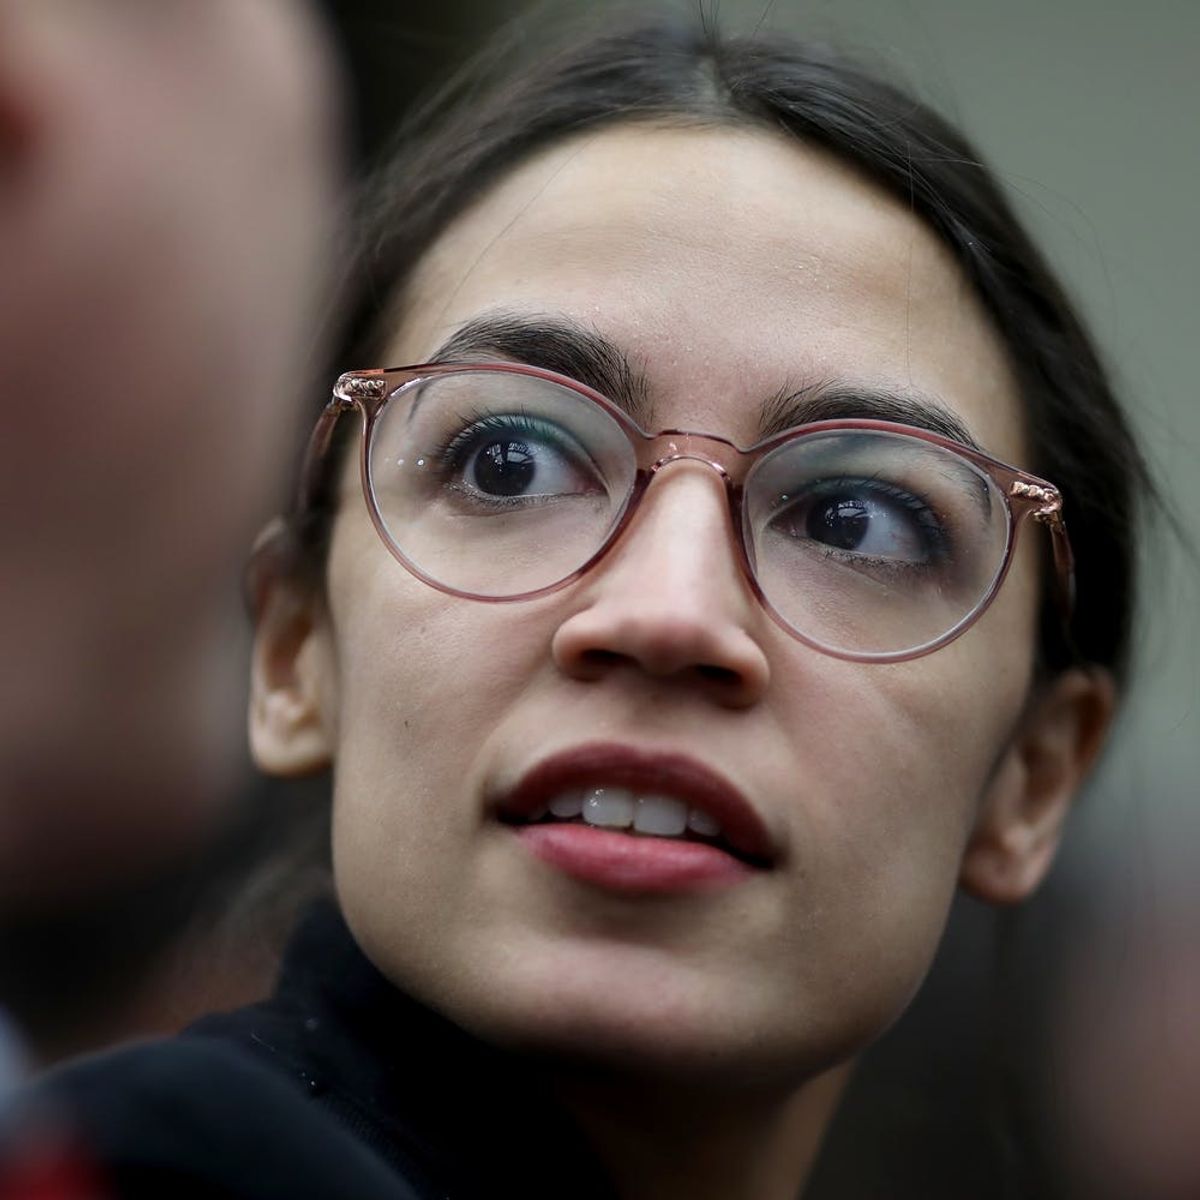 Alexandria Ocasio-Cortez Speech at 2019 Women’s March Nods at the Elephant in the Room of This Year’s Event